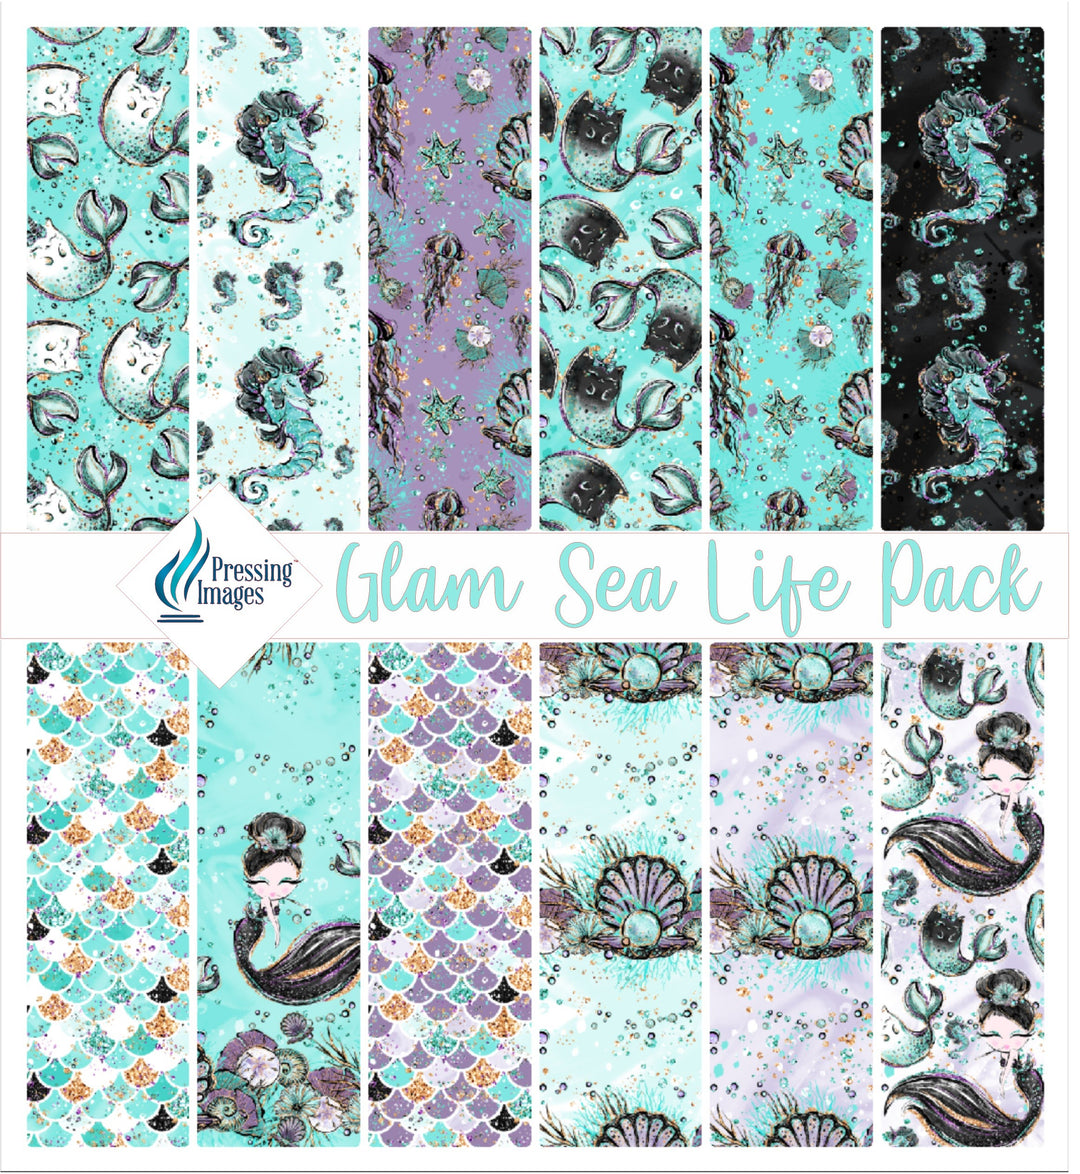 Glam Sea Life Pack